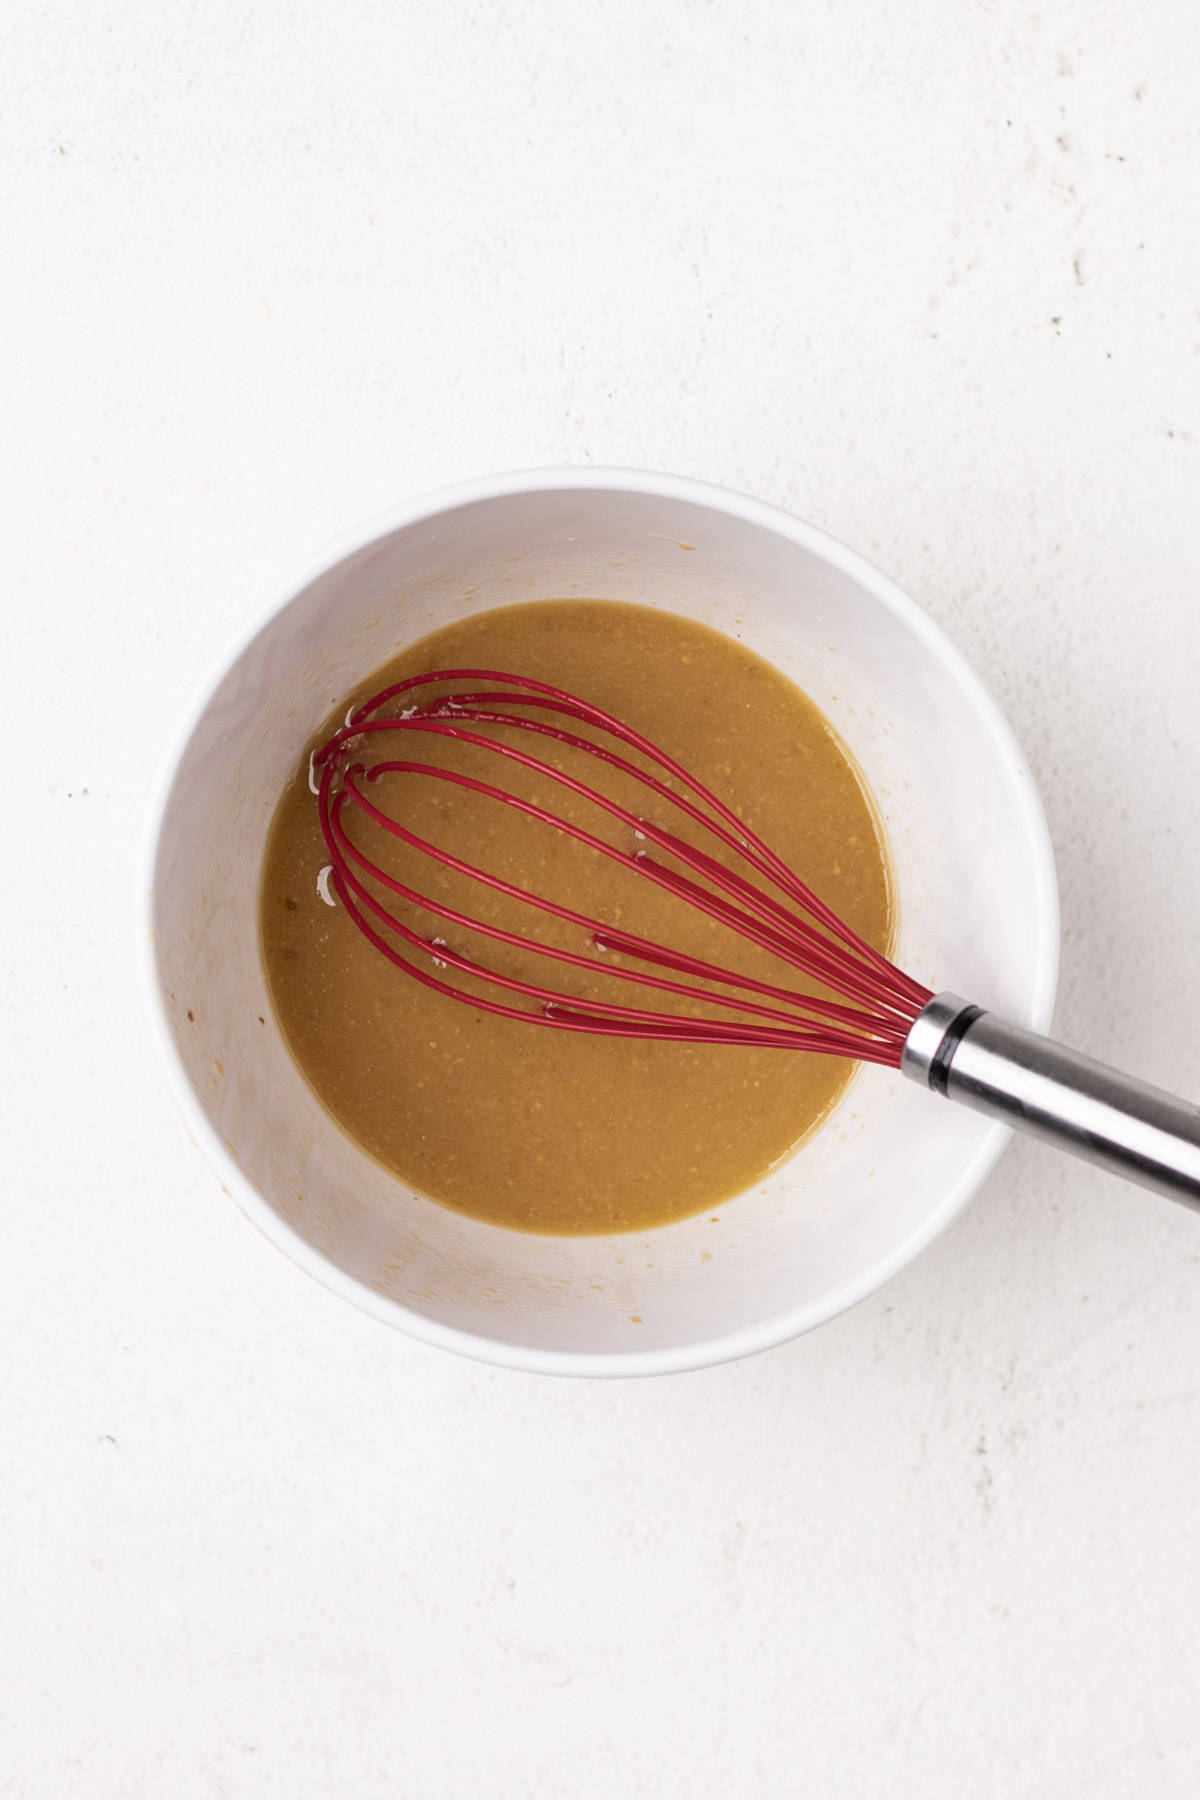 Using a red whisk to mix the Maple Dijon vinaigrette together in a round white bowl.